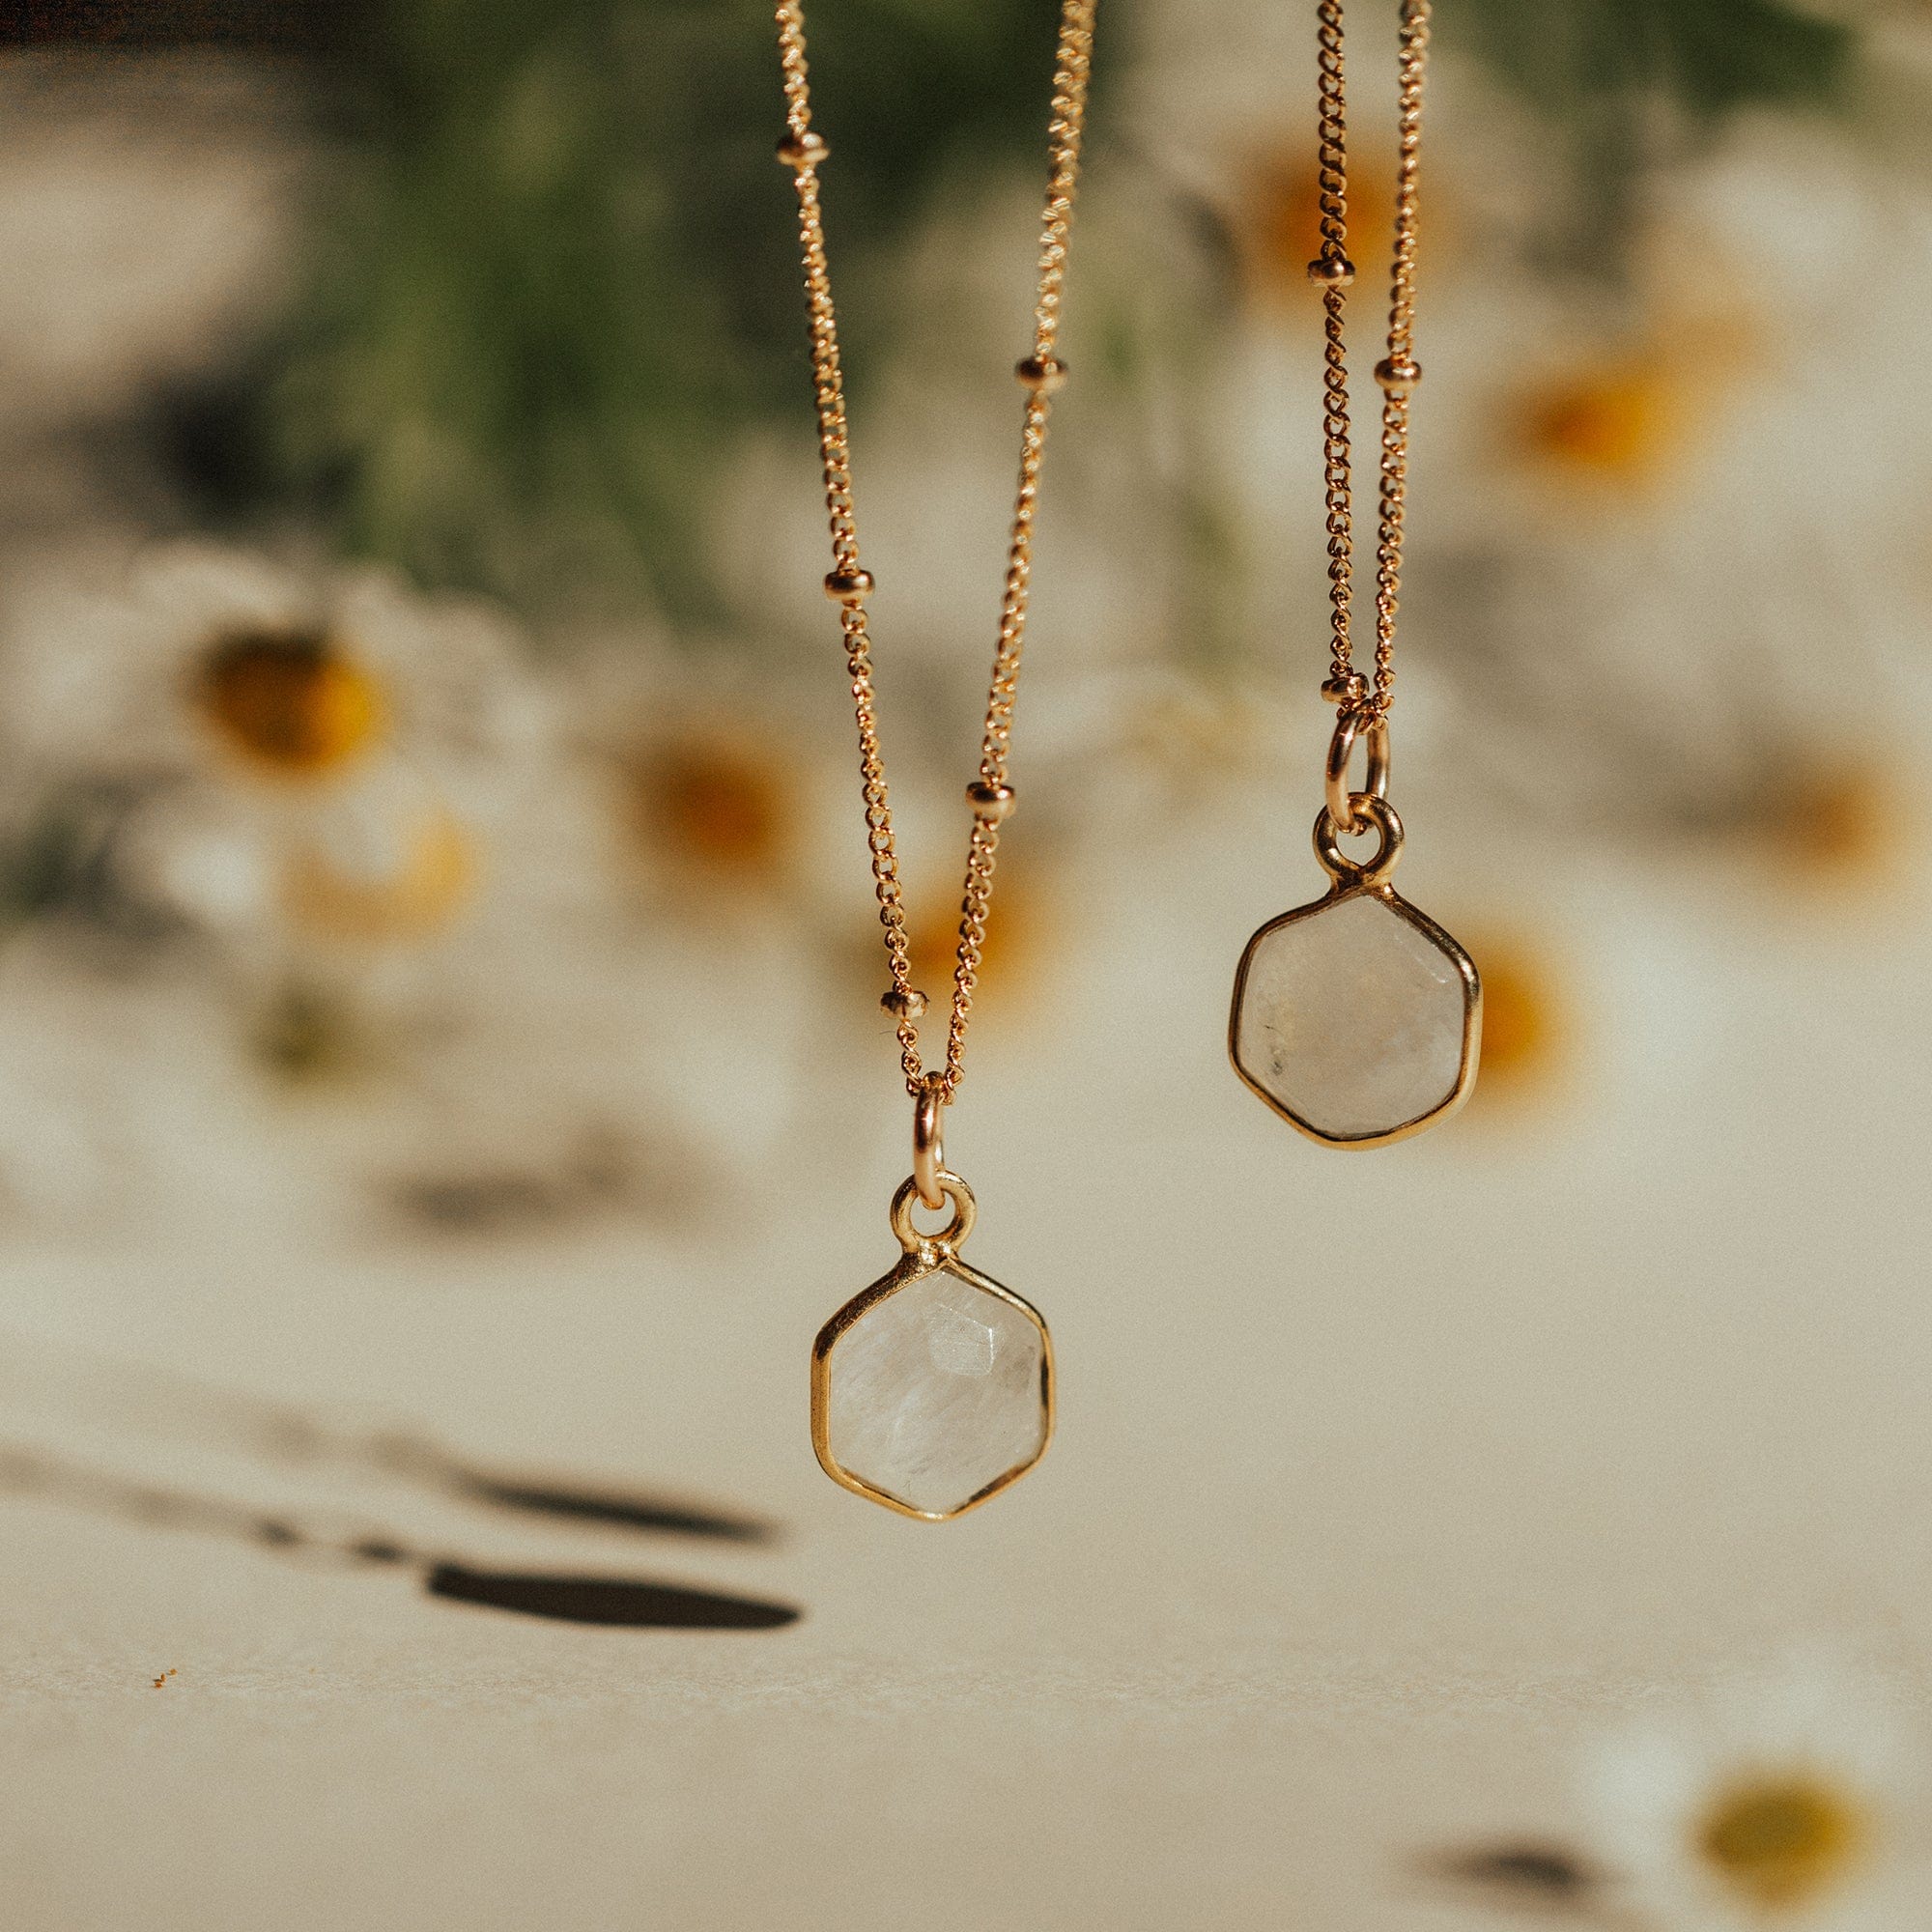 Handmade item Dispatches from a small business in India Necklace length: 16  Inches Materials: Rose gold, Silver, Stone Stone: Moonstone Closure: Slide  lock Chain style: Figure 8 Style: Minimalist Recycled